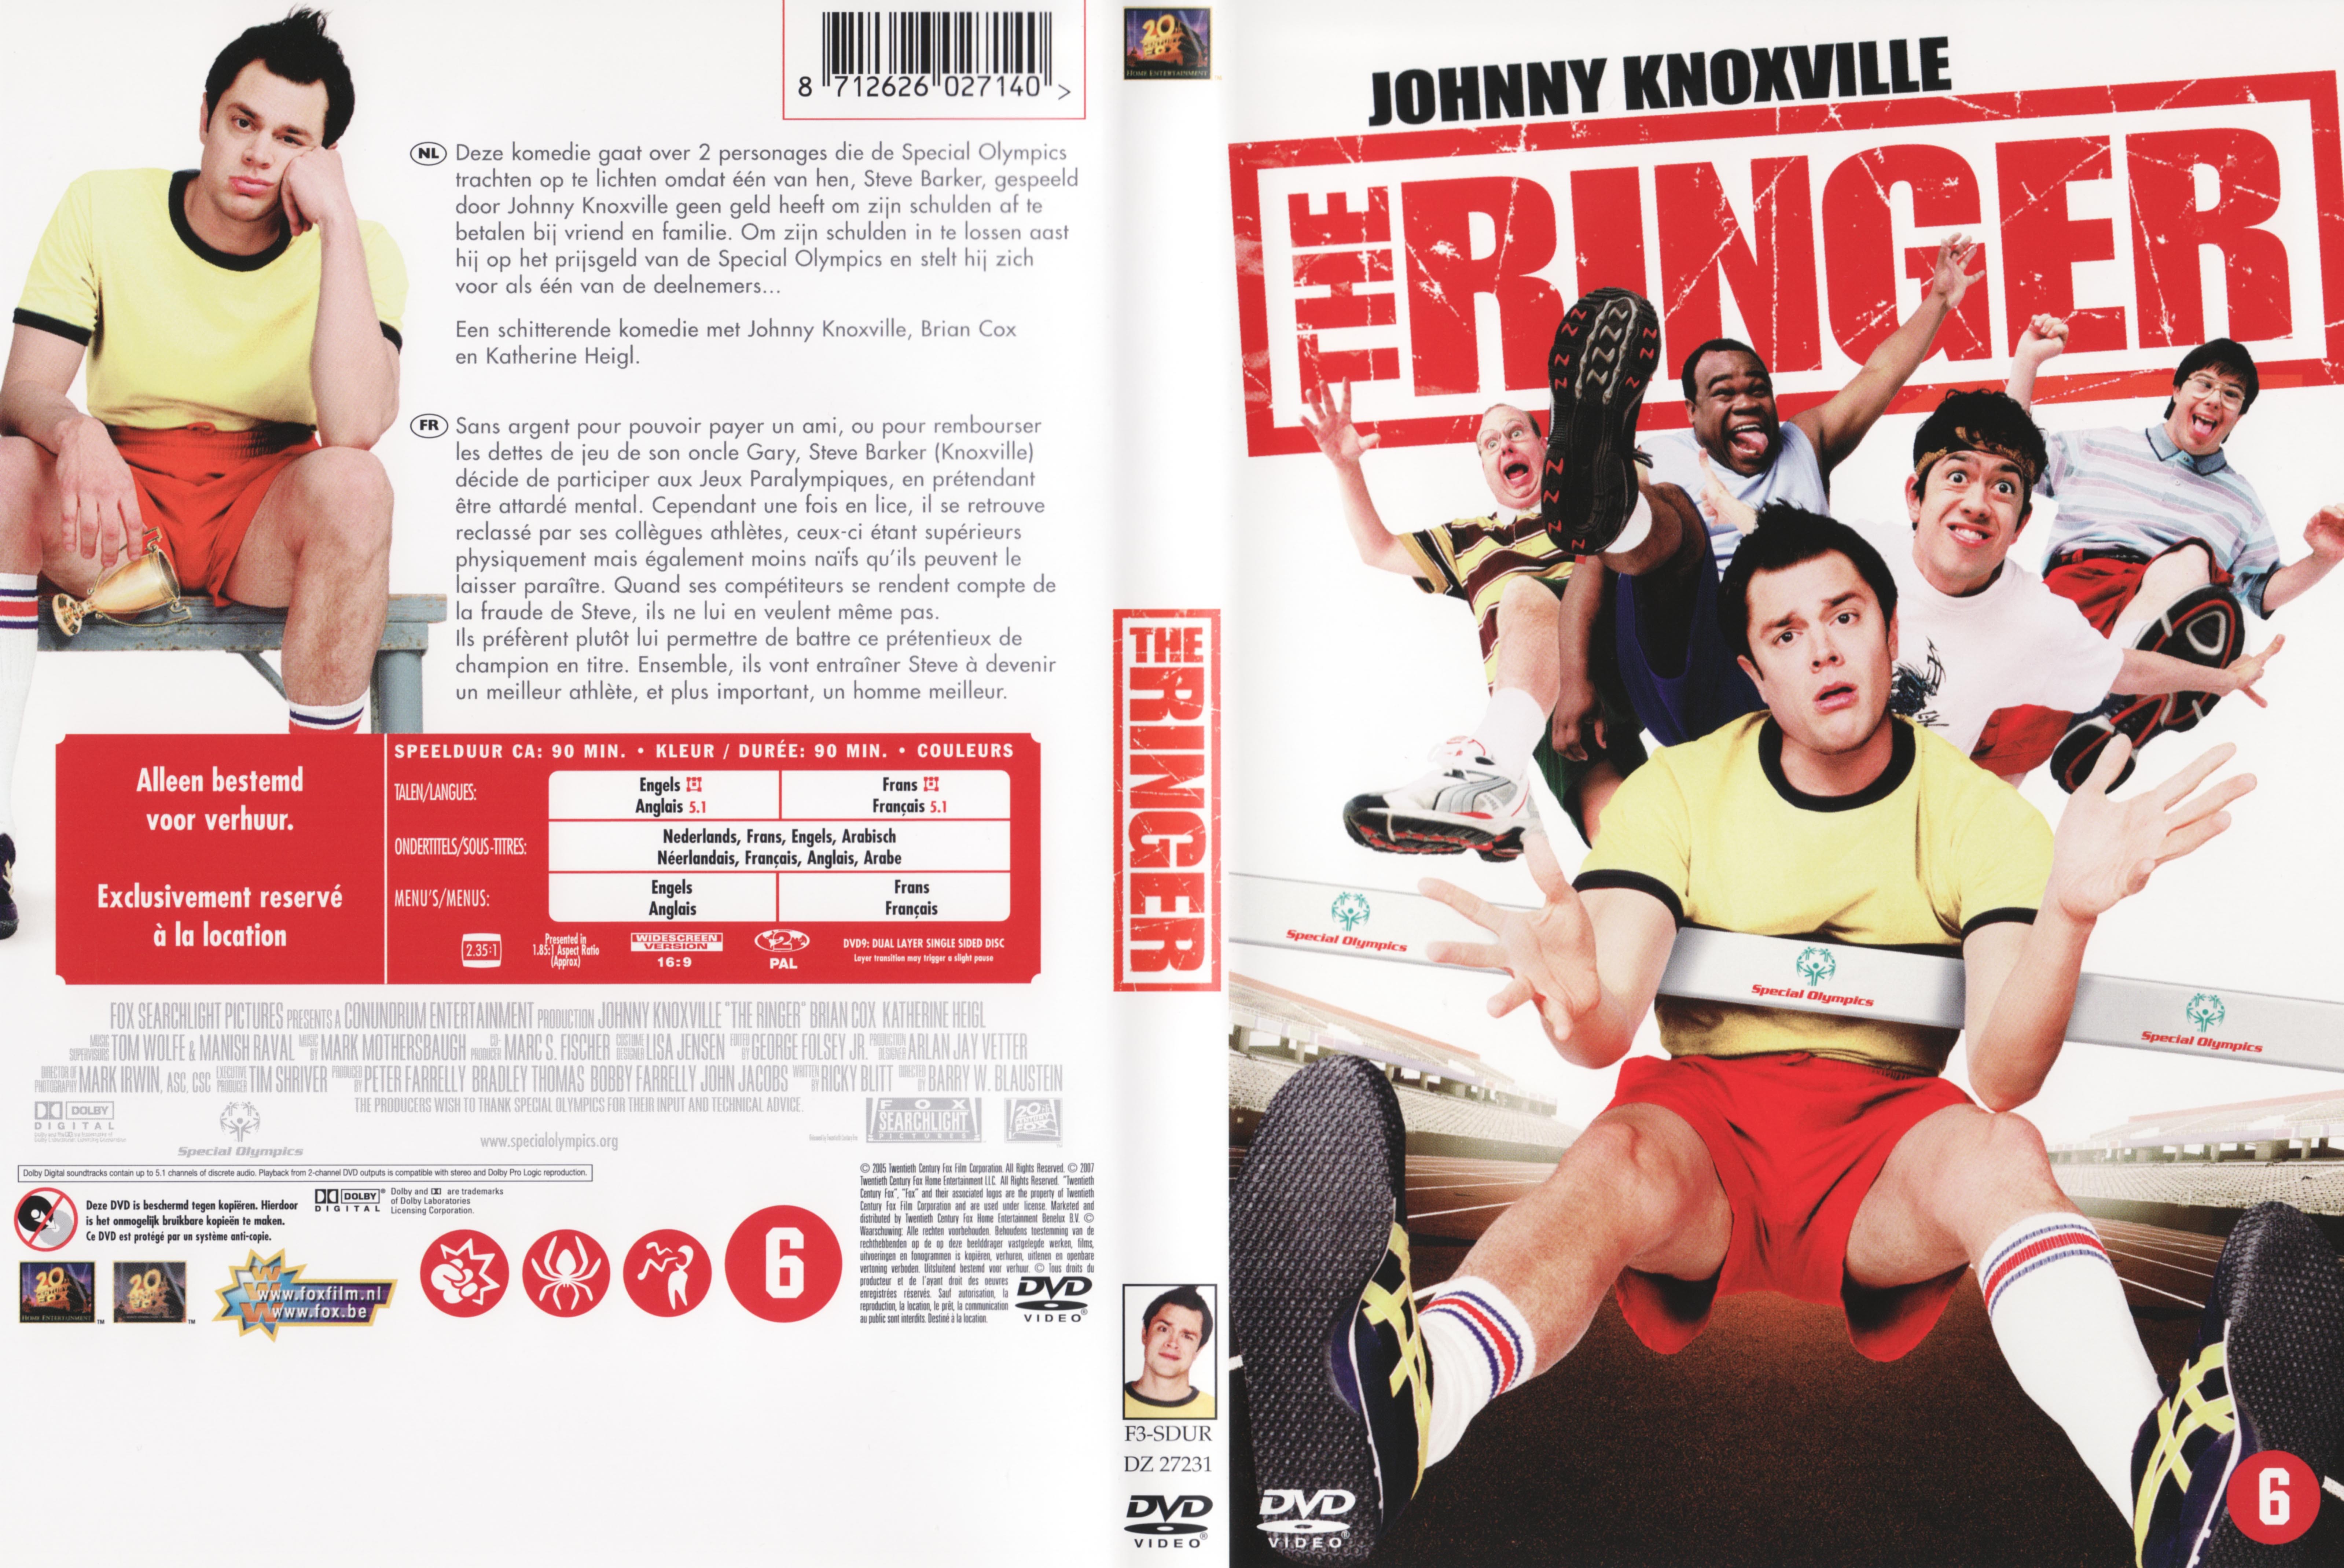 Jaquette DVD The ringer